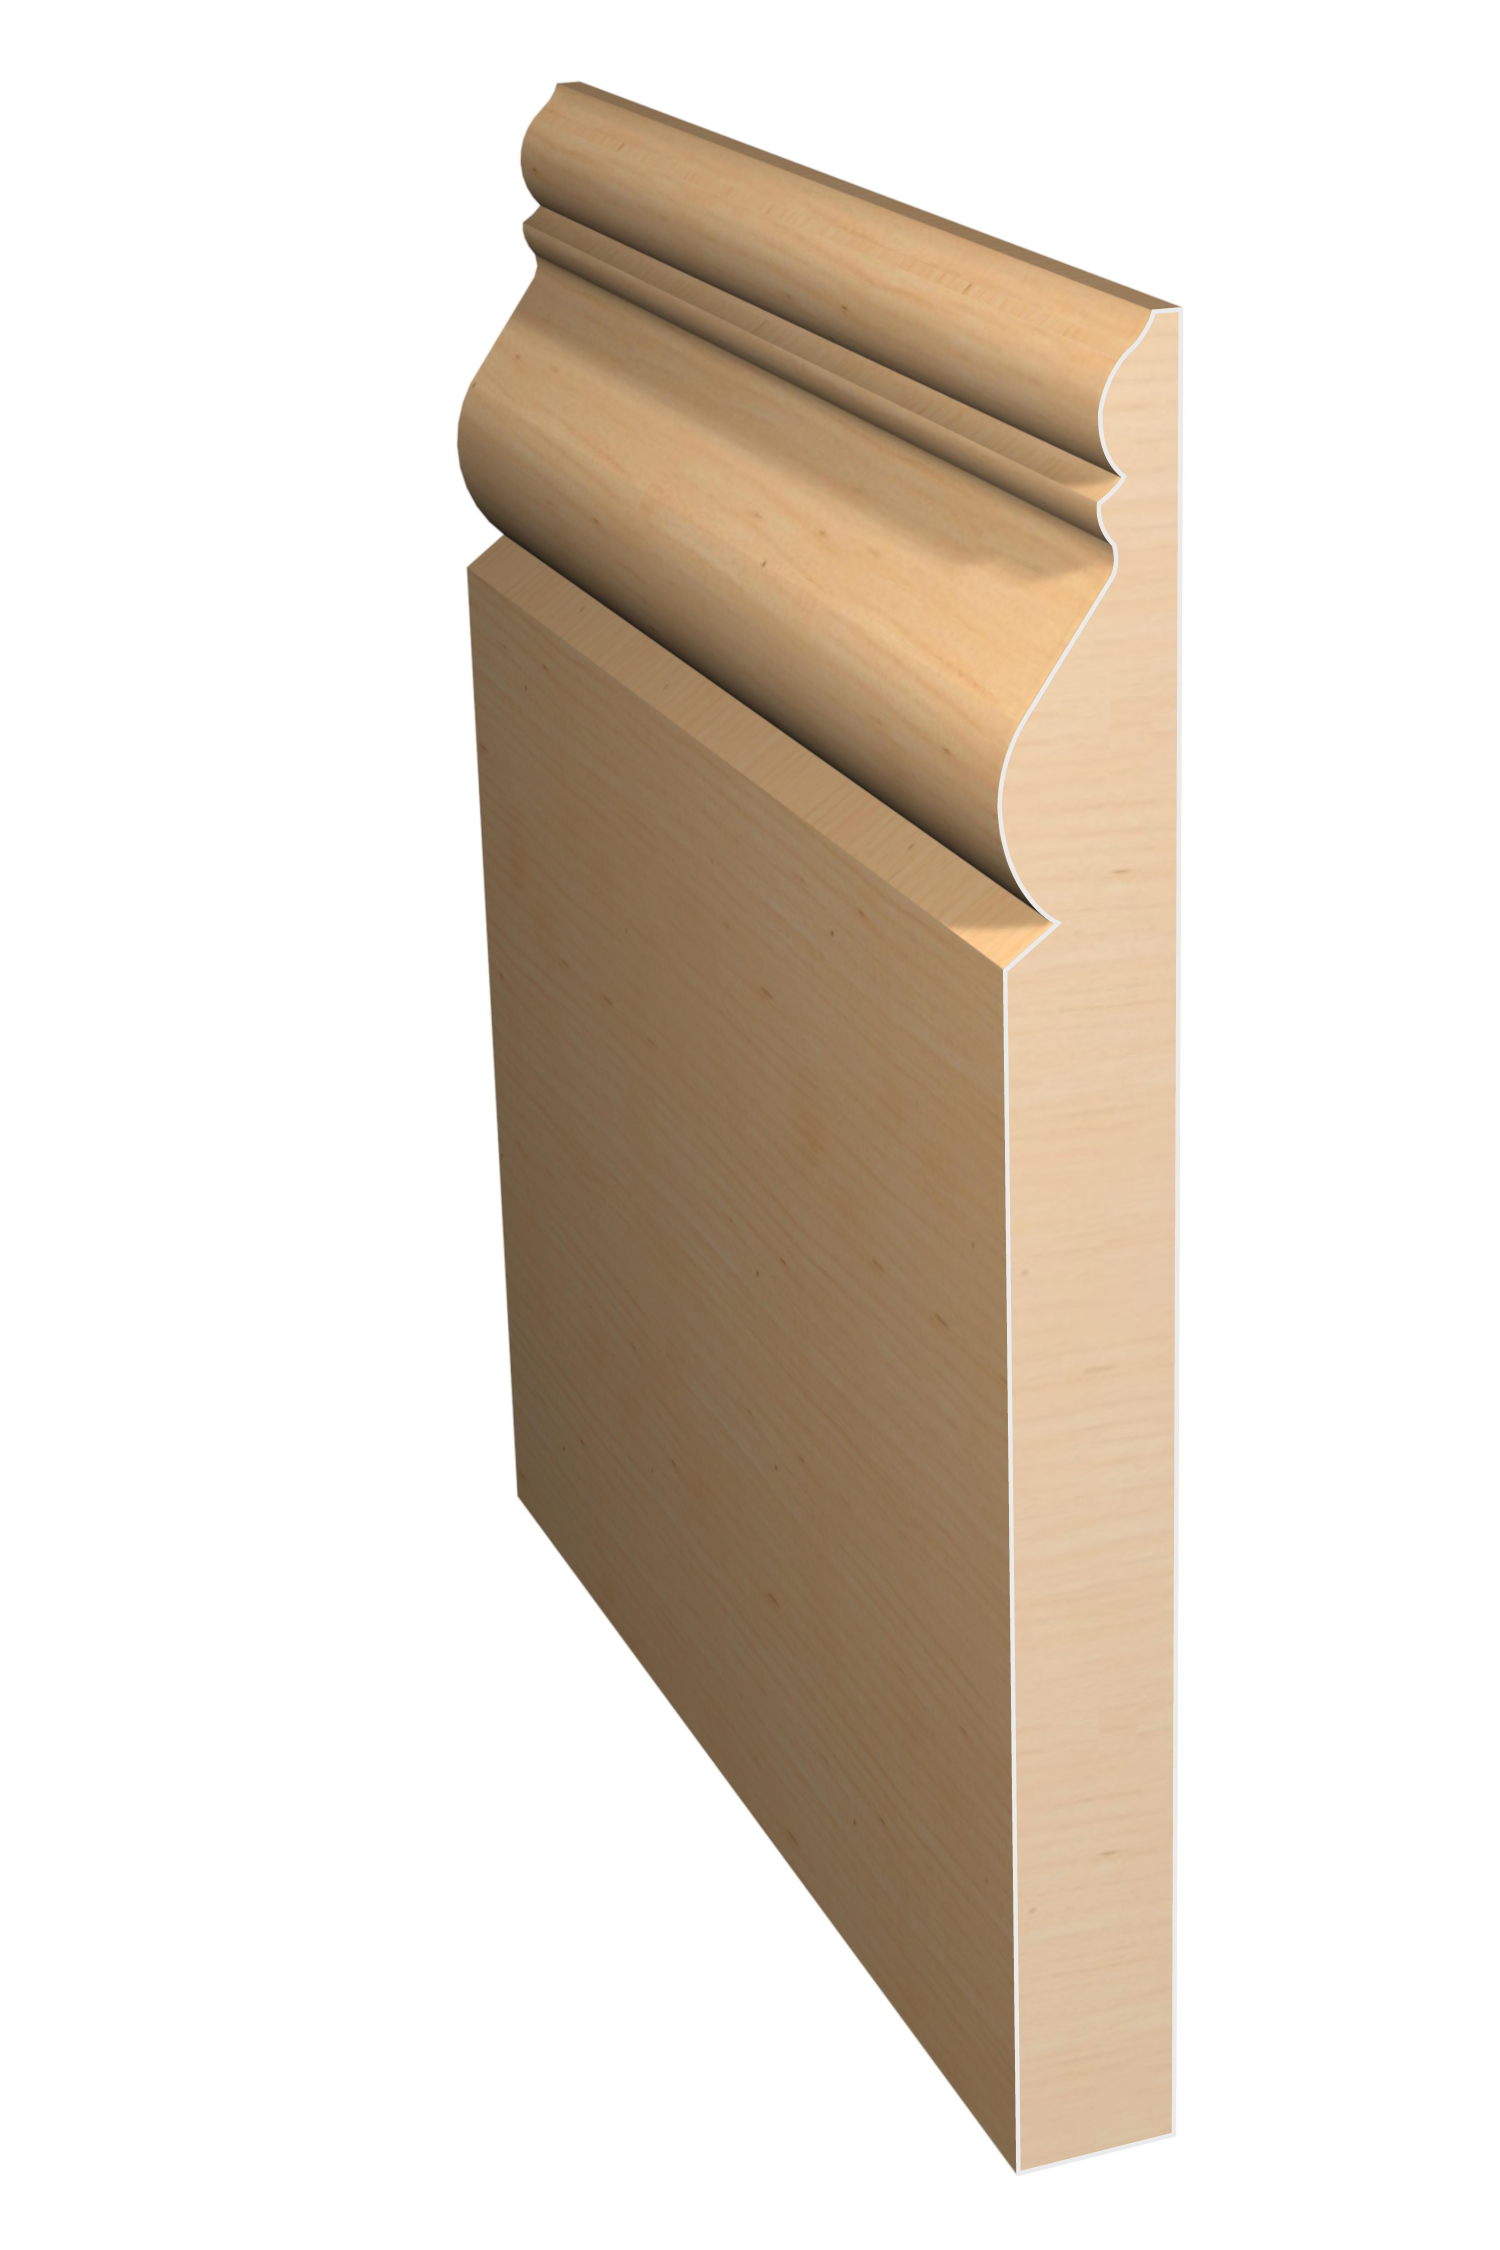 Three dimensional rendering of custom base wood molding BAPL71411 made by Public Lumber Company in Detroit.